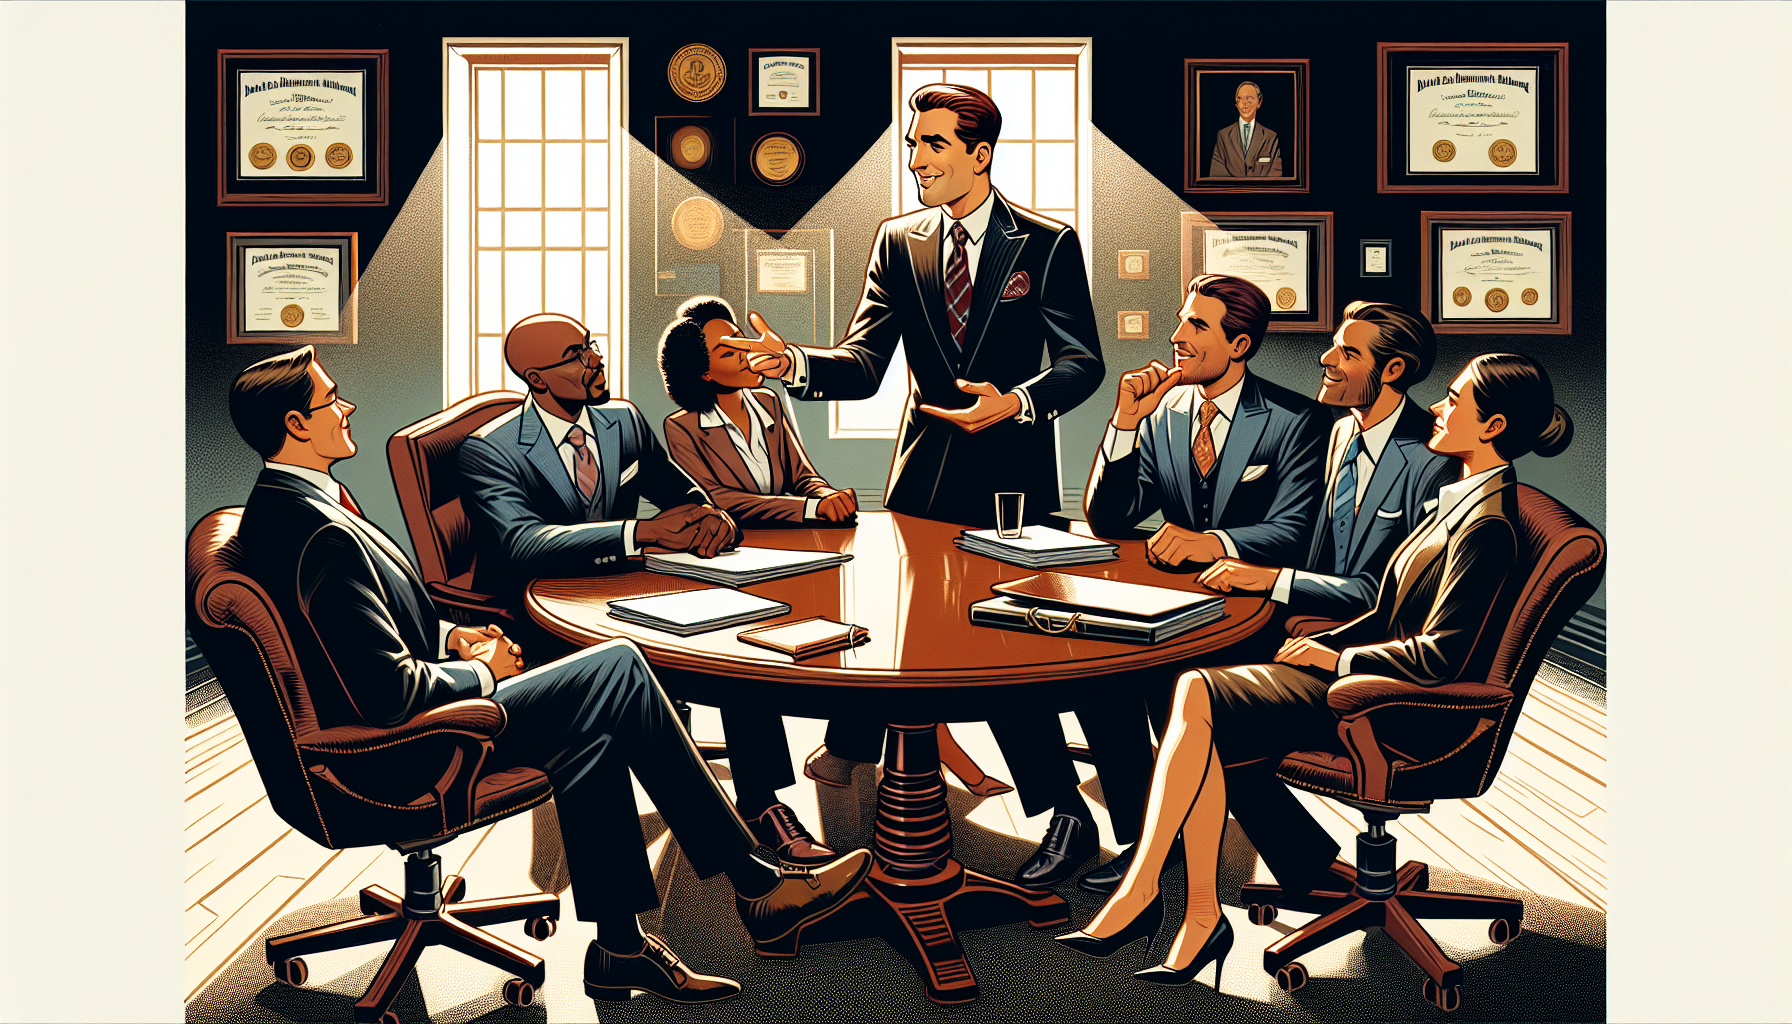 Illustration of corporate lawyer with clients discussing business ventures